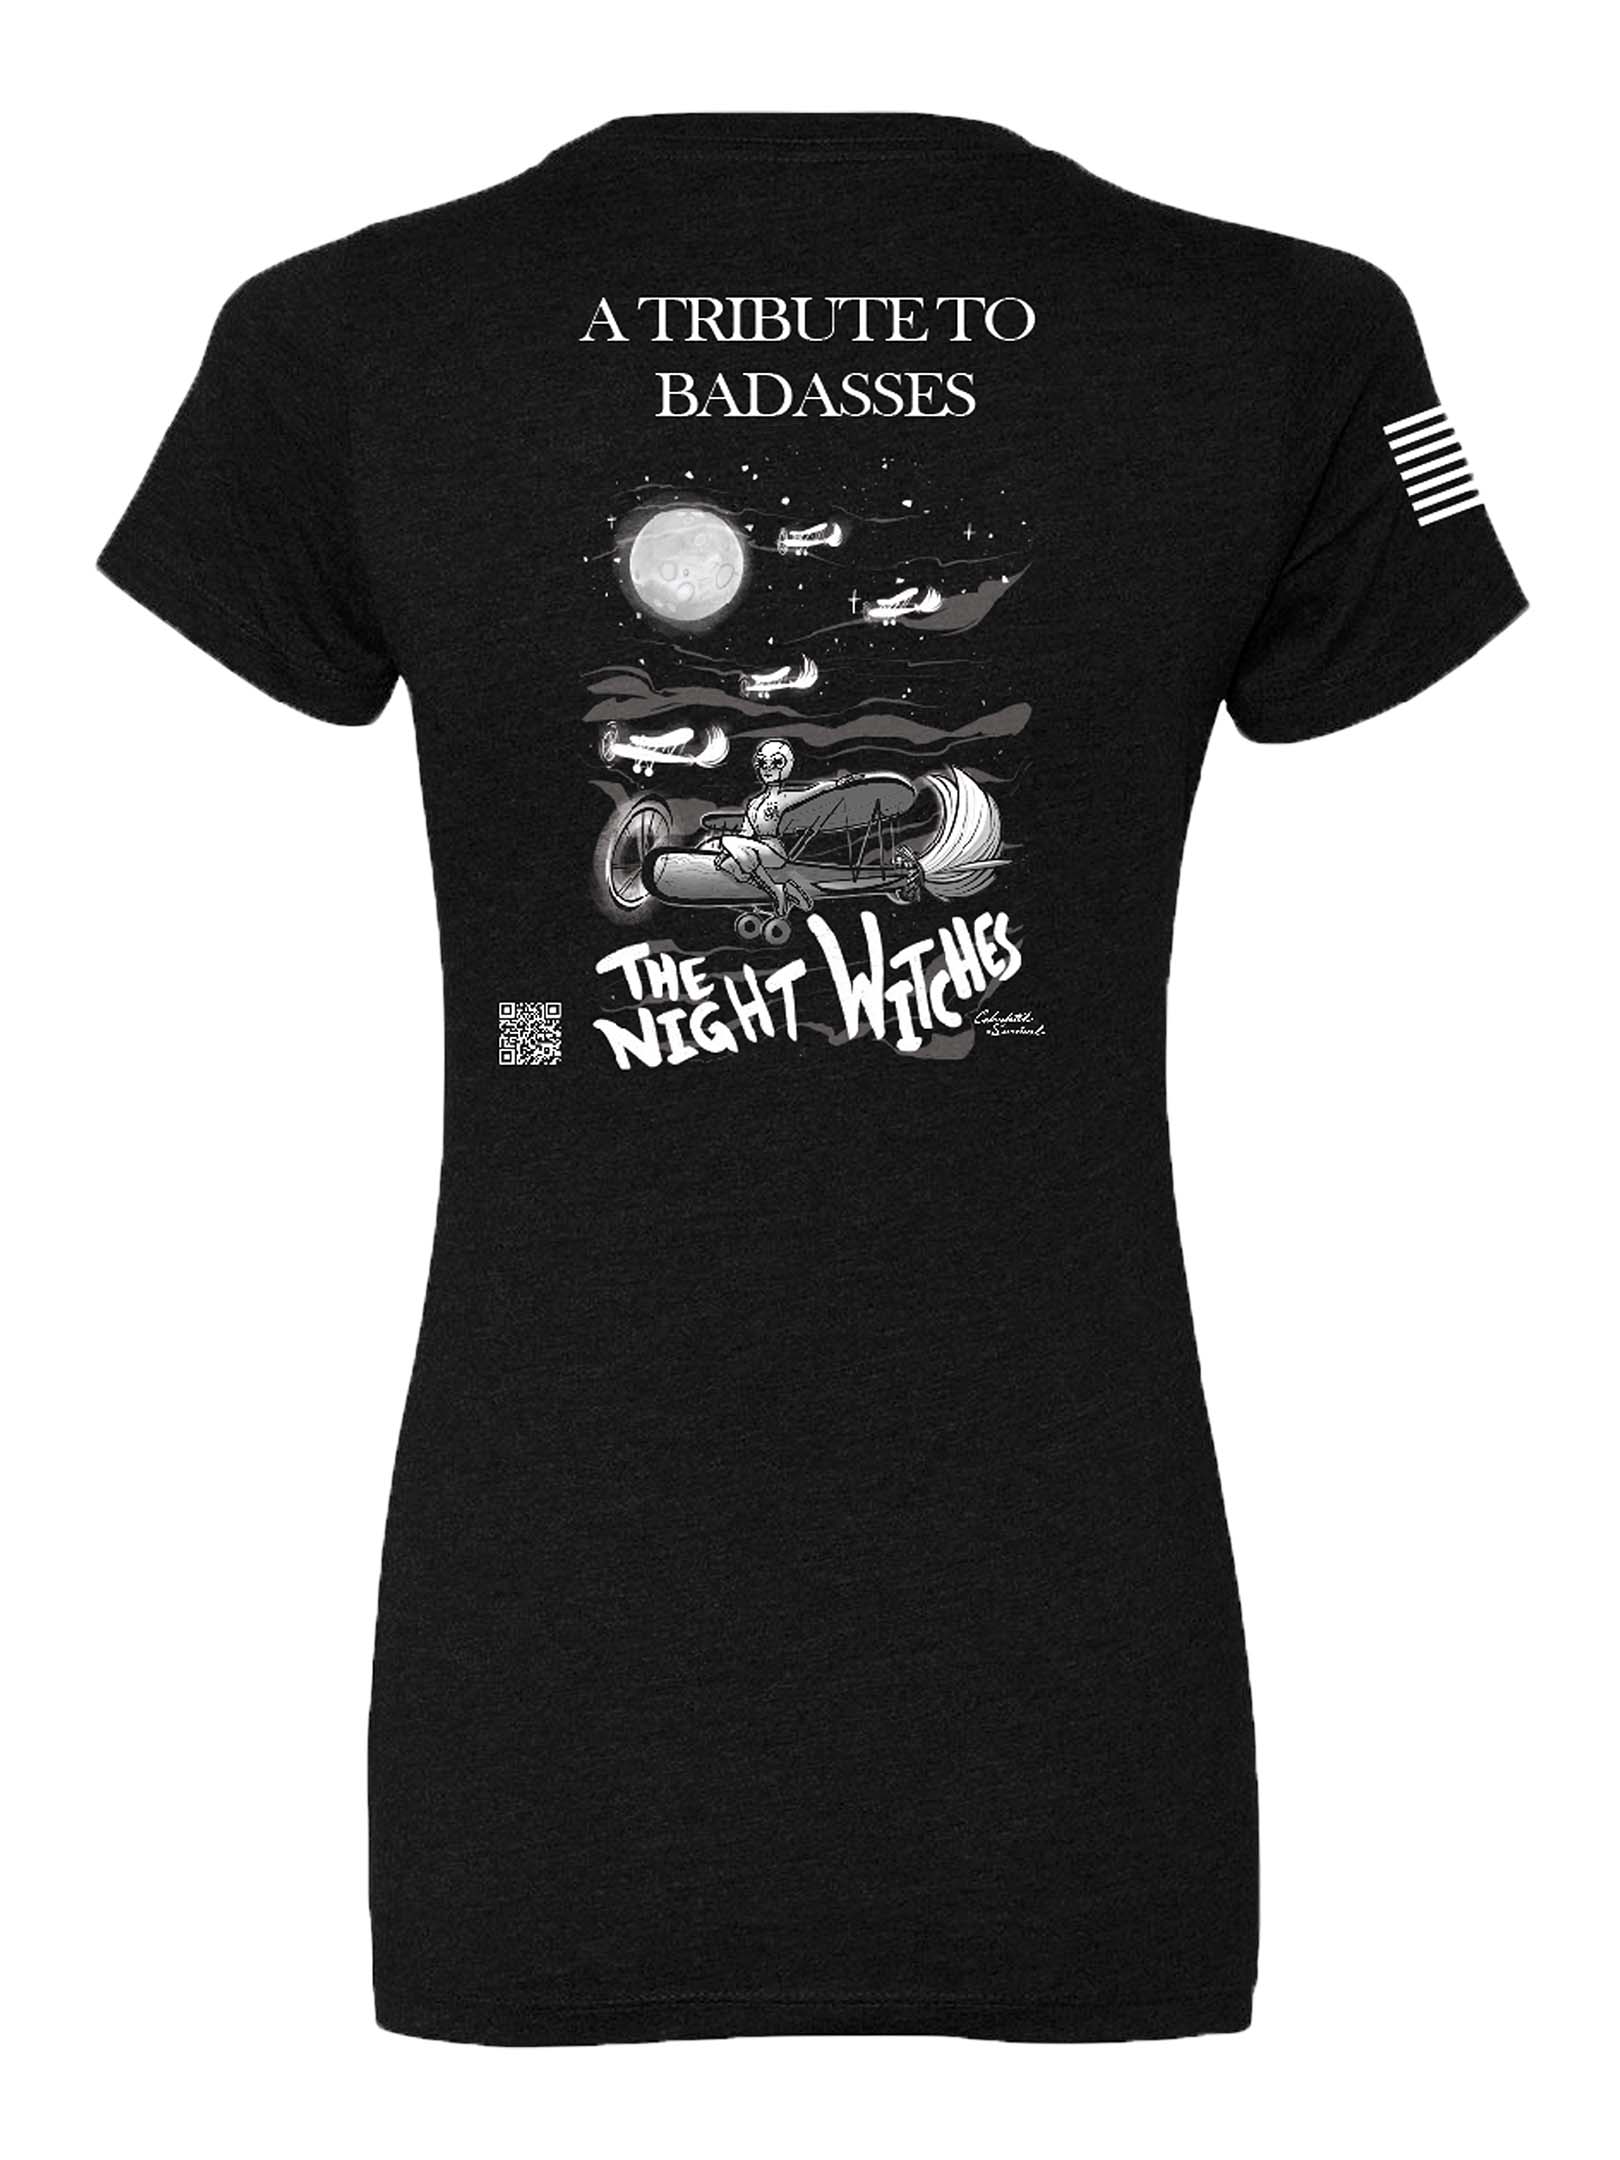 Women's Night Witches Shirt back view